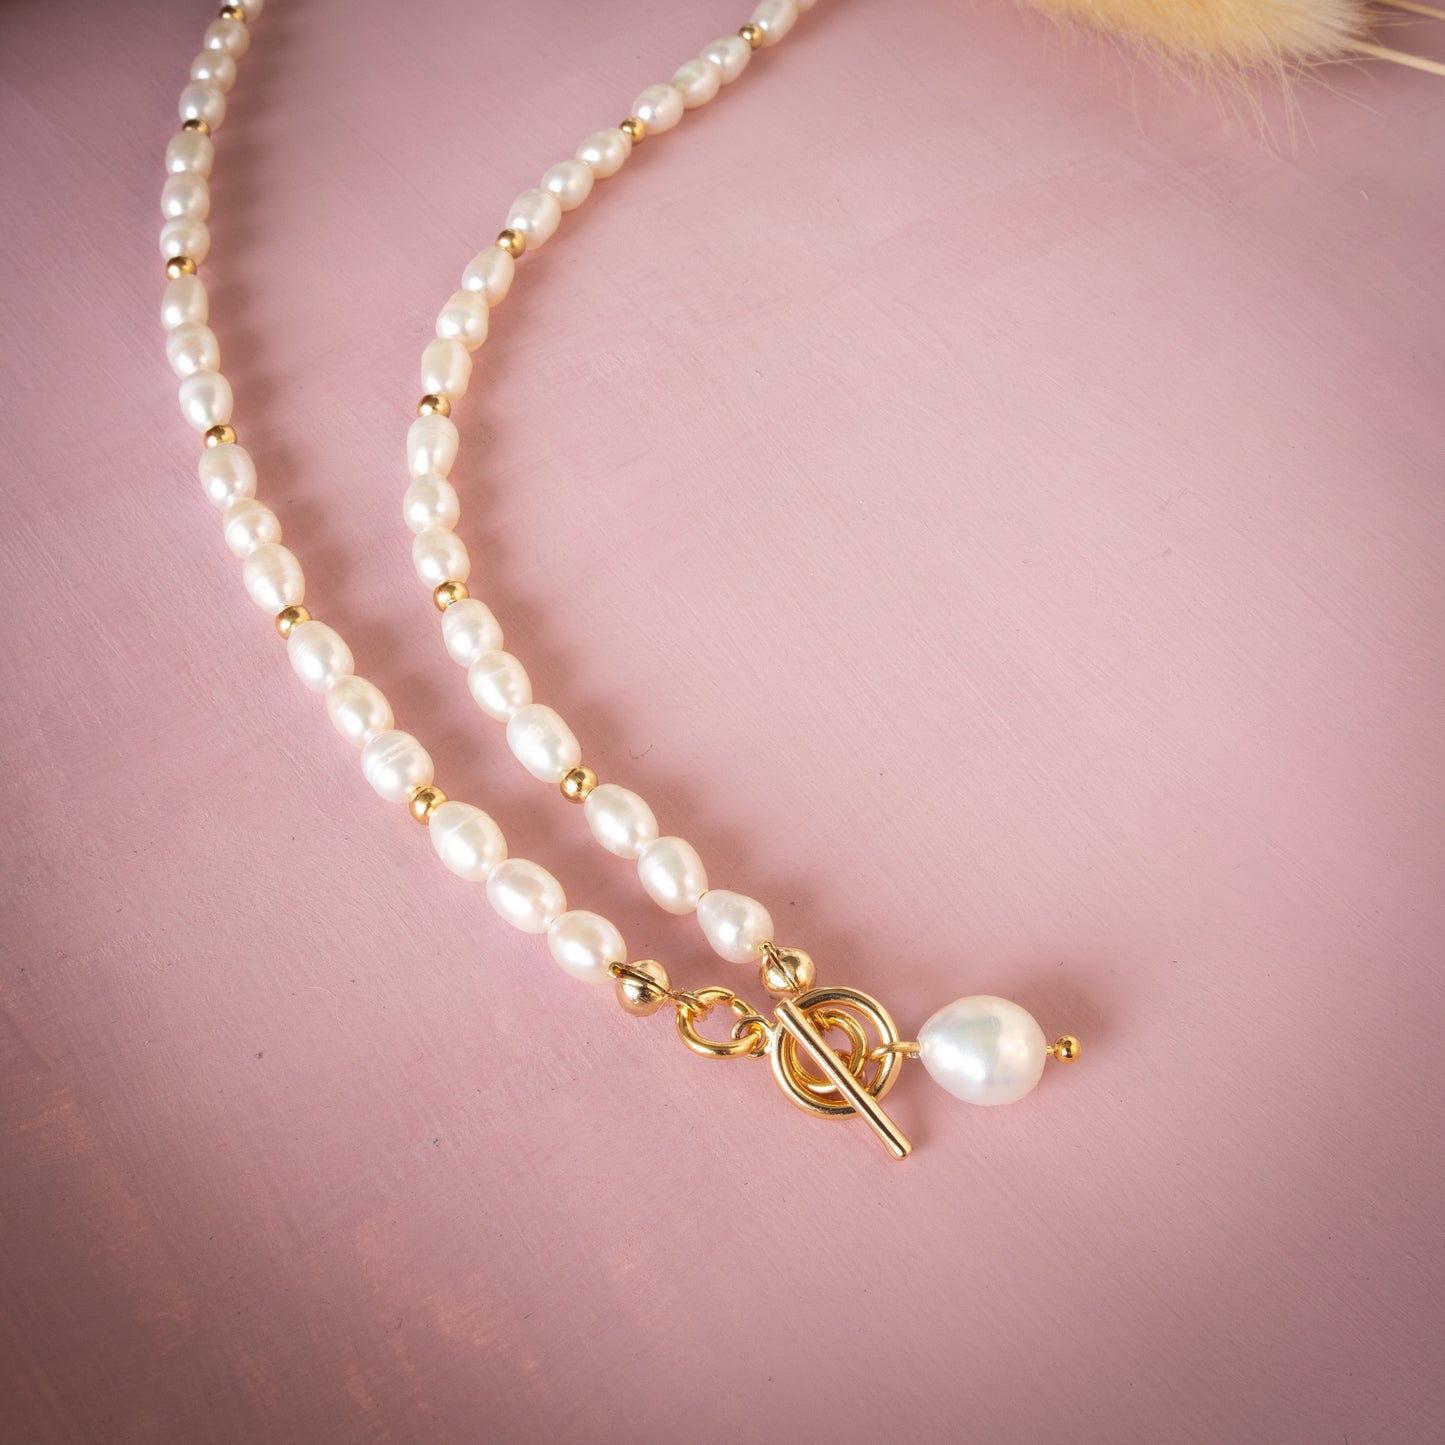 Rice Pearl Necklace with Pearl Pendant